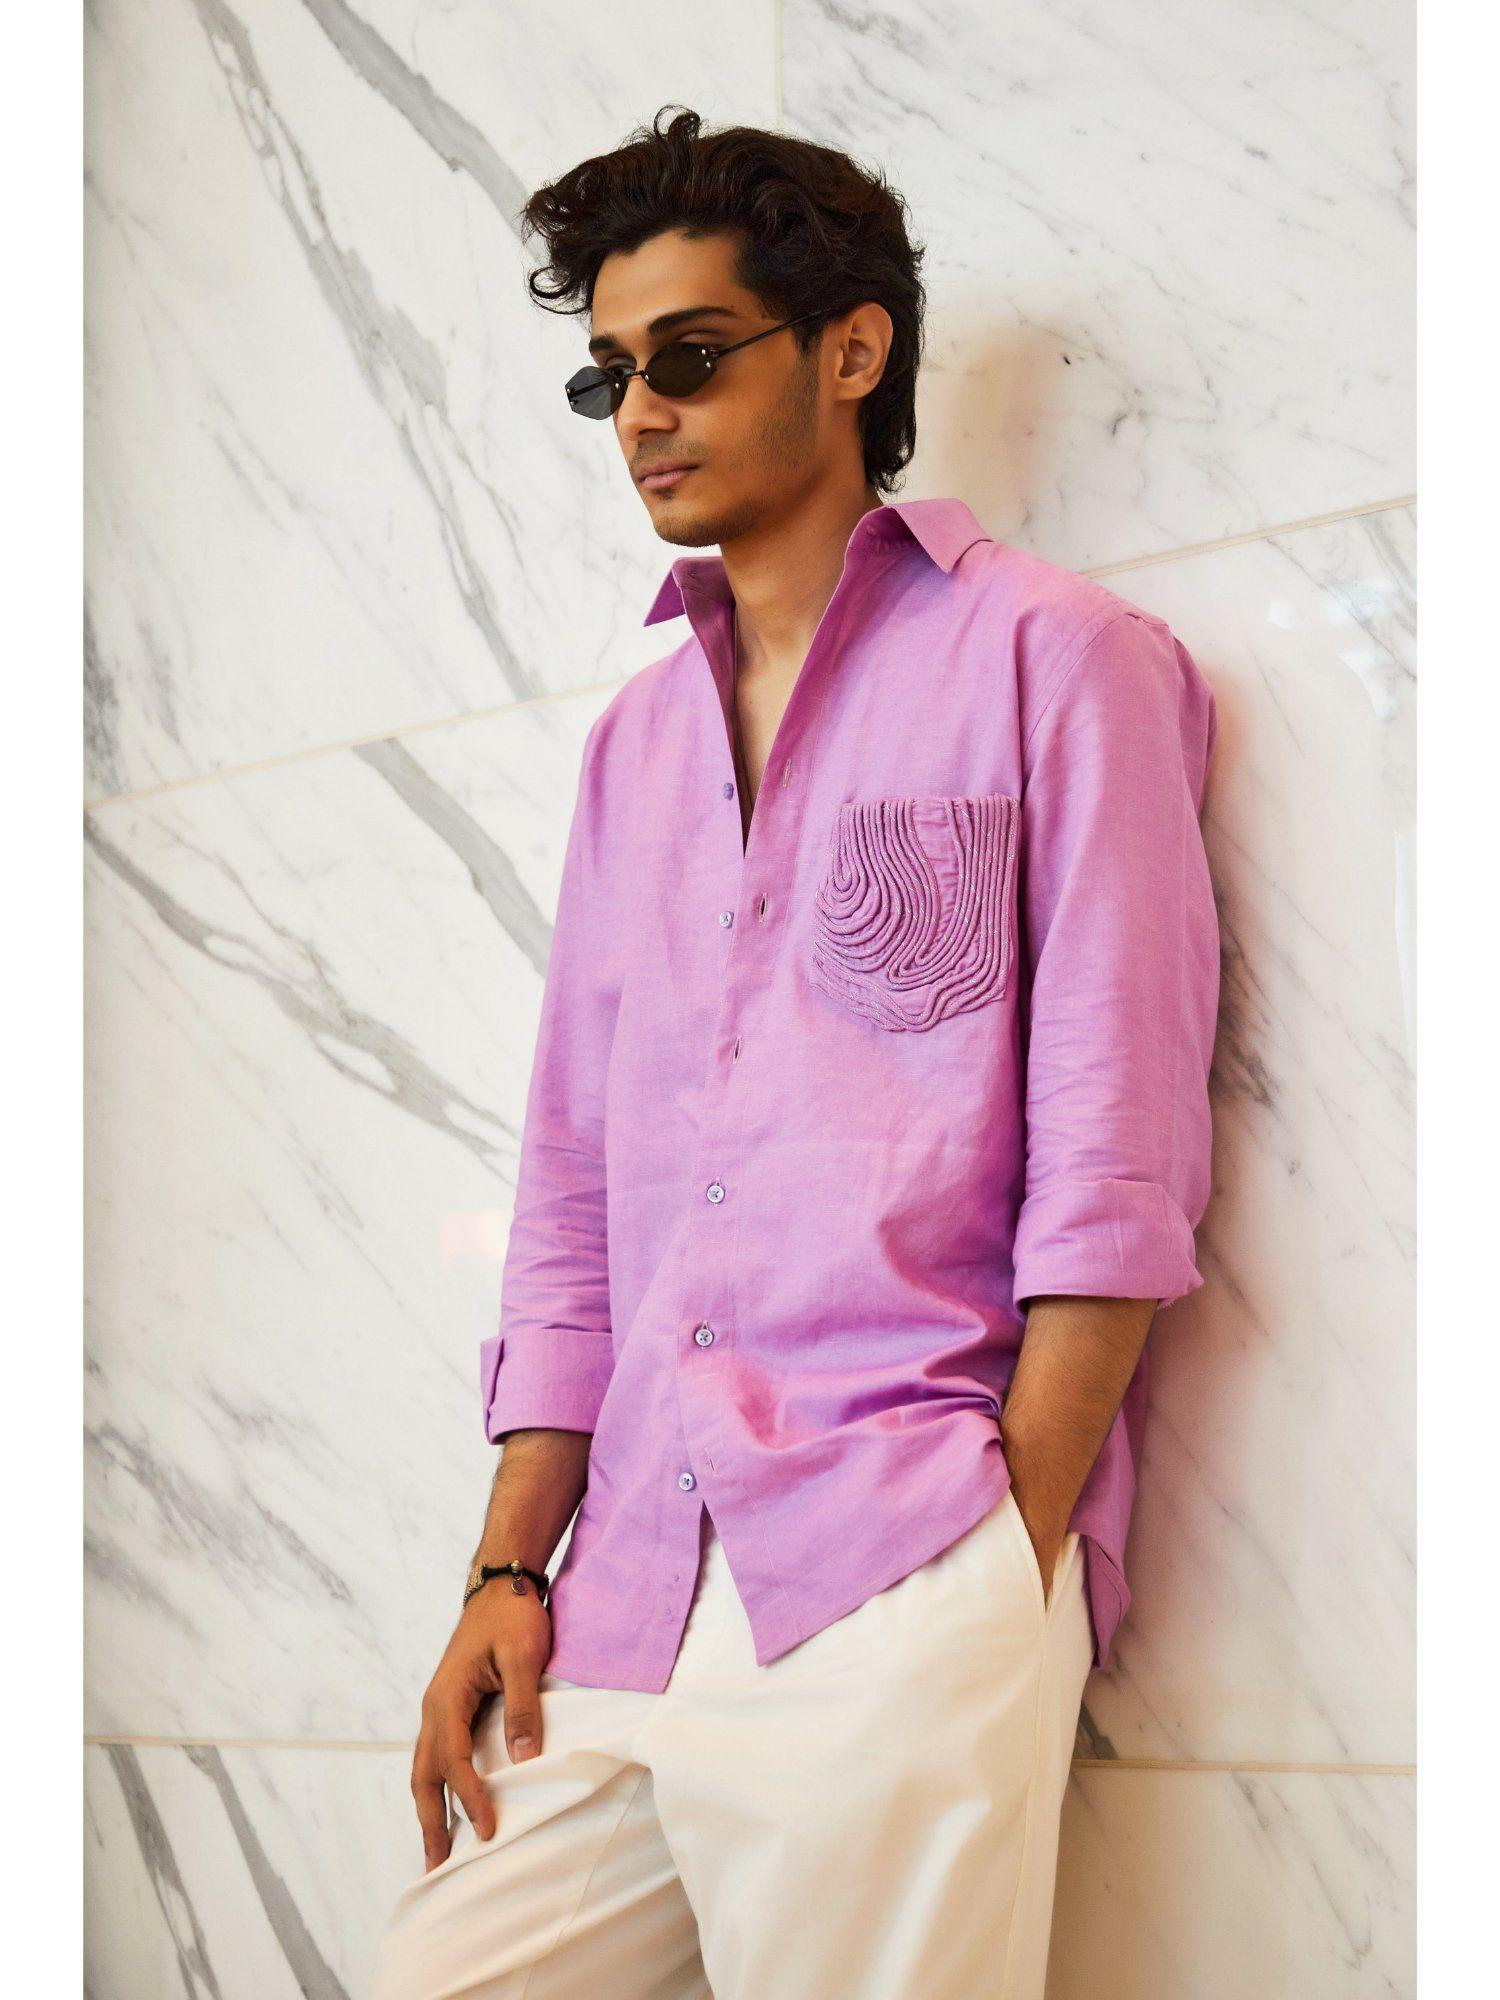 lilac linen shirt with cording pocket detailing